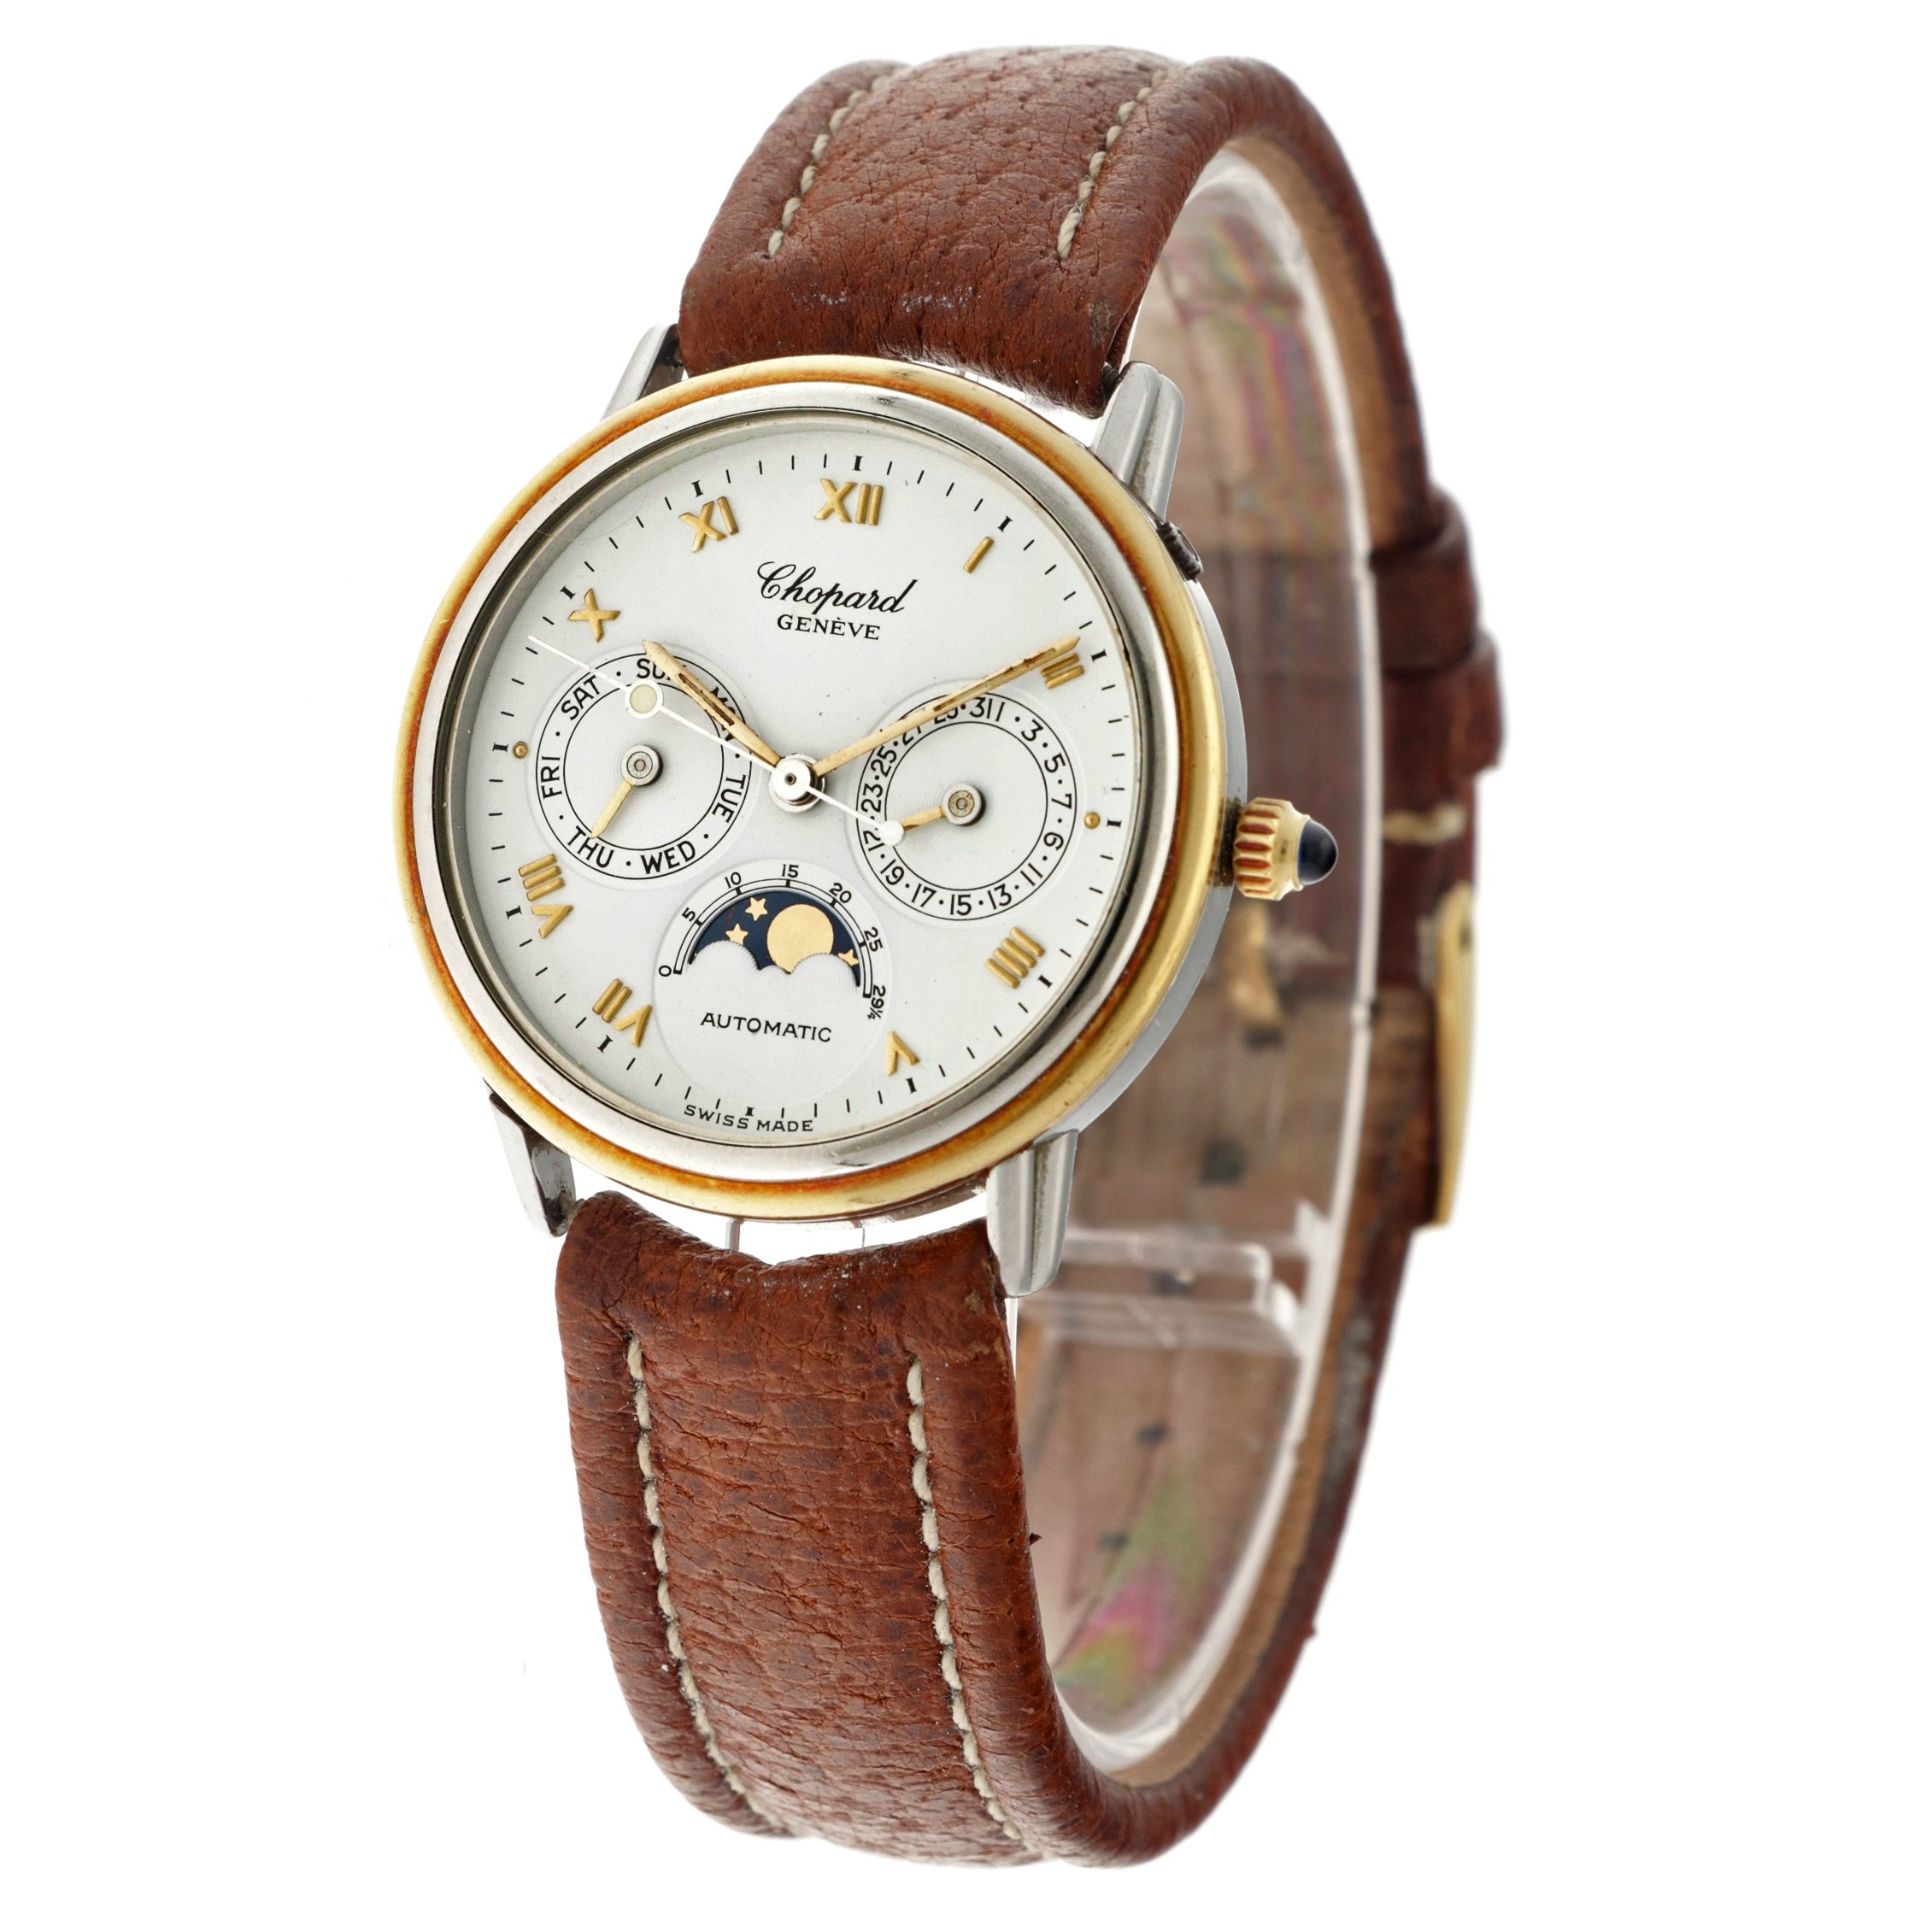 No Reserve - Chopard Luna d'Oro Moonphase 8131 - Men's watch. - Image 2 of 6